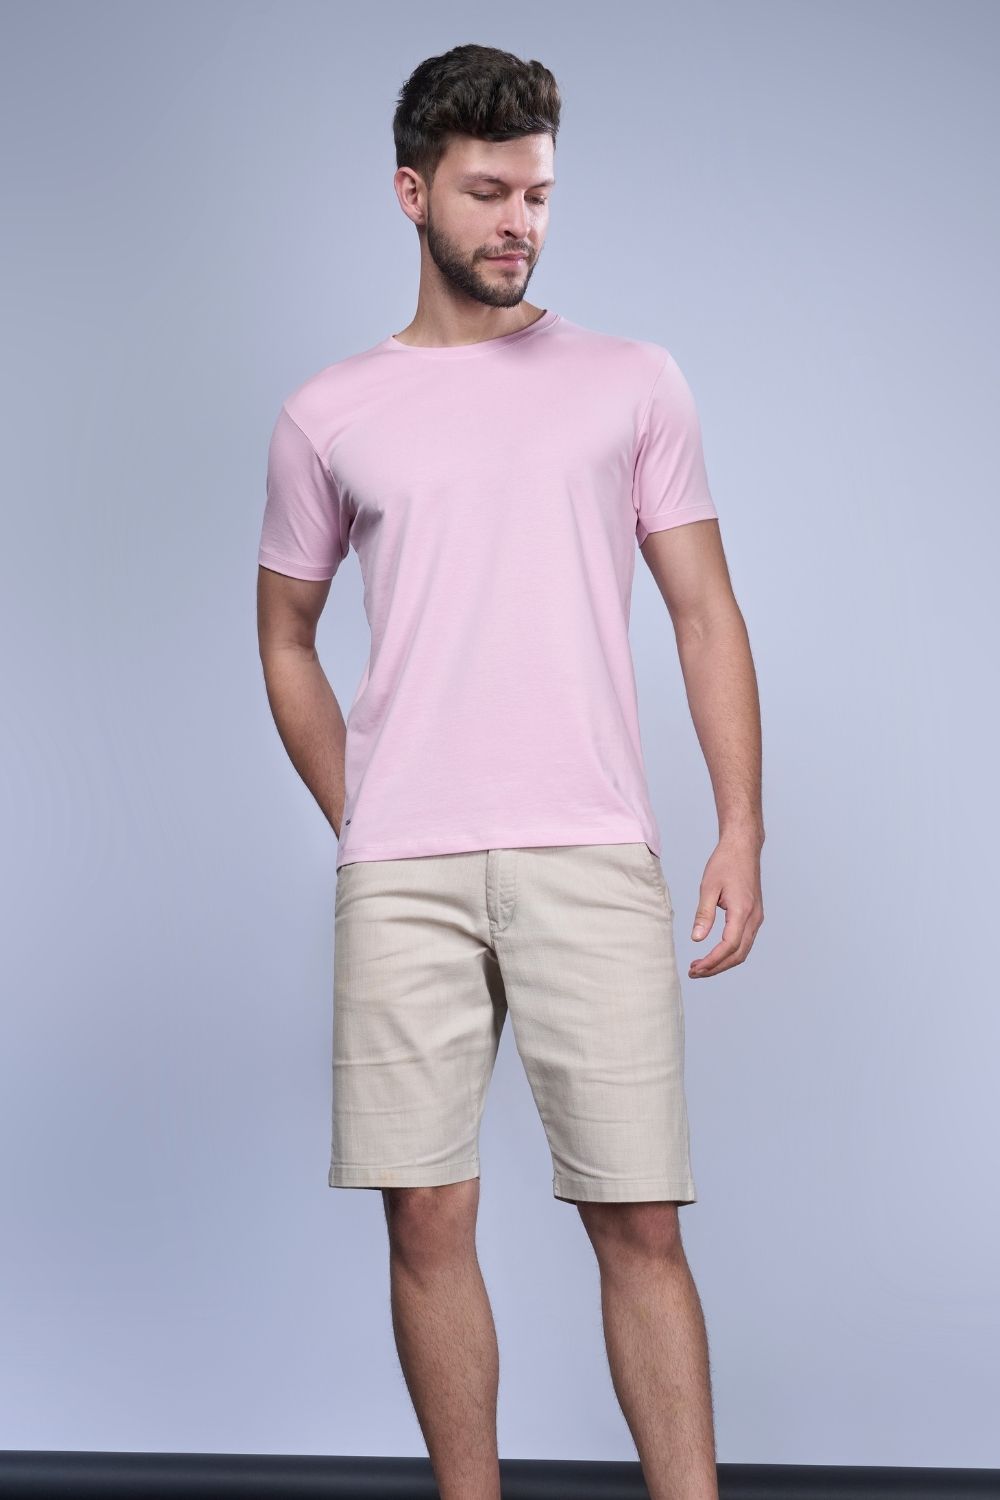 Cotton Stretch T shirt for men in the solid color lilac shade with half sleeves and round neck, front view.